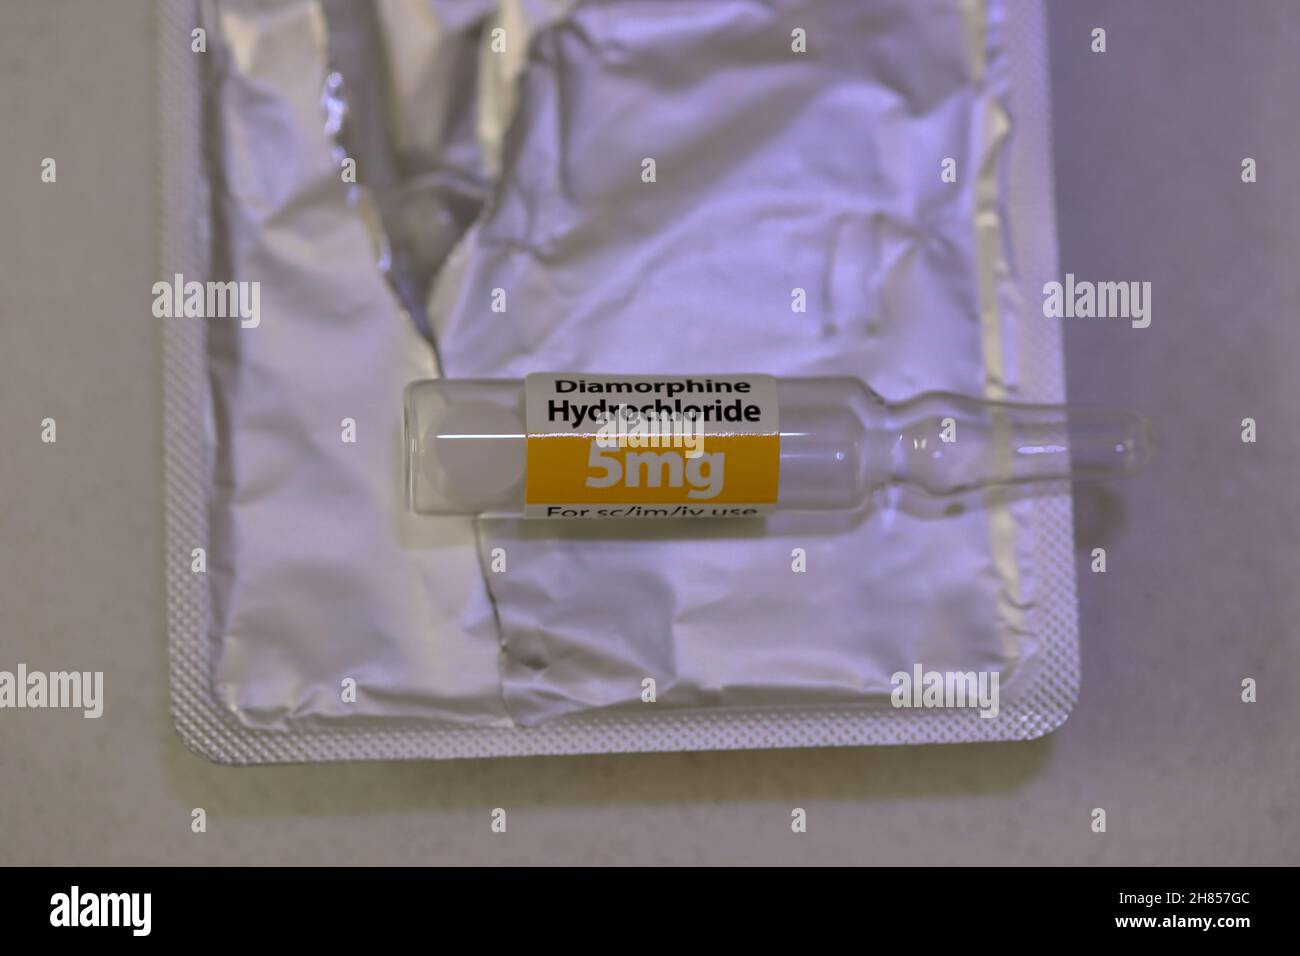 A glass ampoule  contianing 5mg of Diamorphine Hydrochloride (heroin) as a powder, on a packet of 5 other ampoules Stock Photo